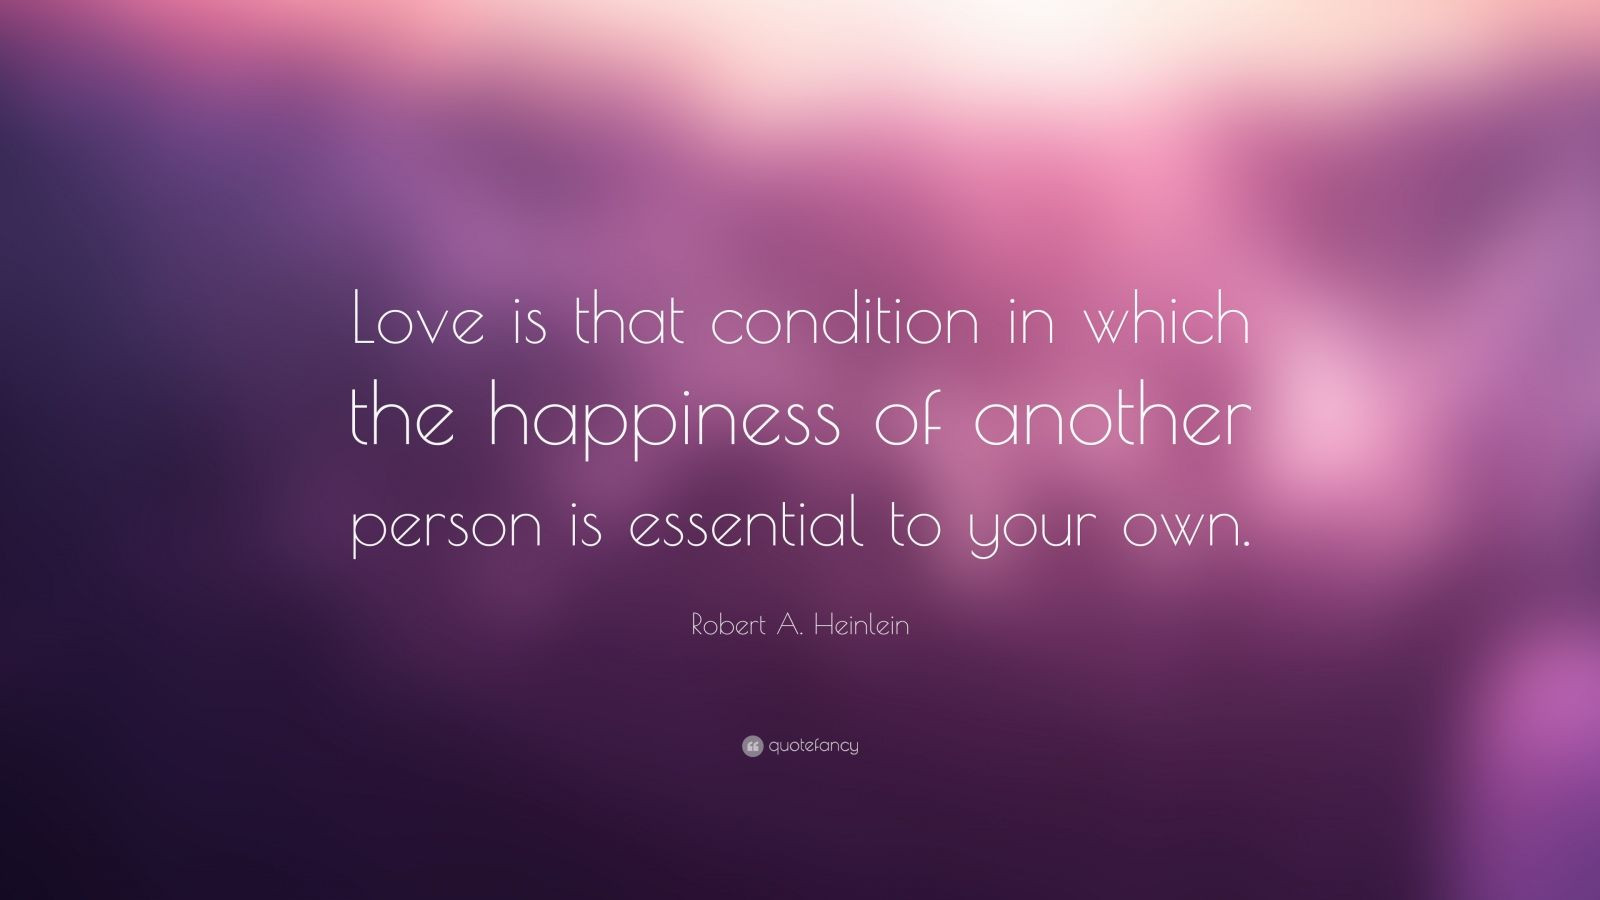 Relationship Happiness Quotes
 Robert A Heinlein Quote “Love is that condition in which